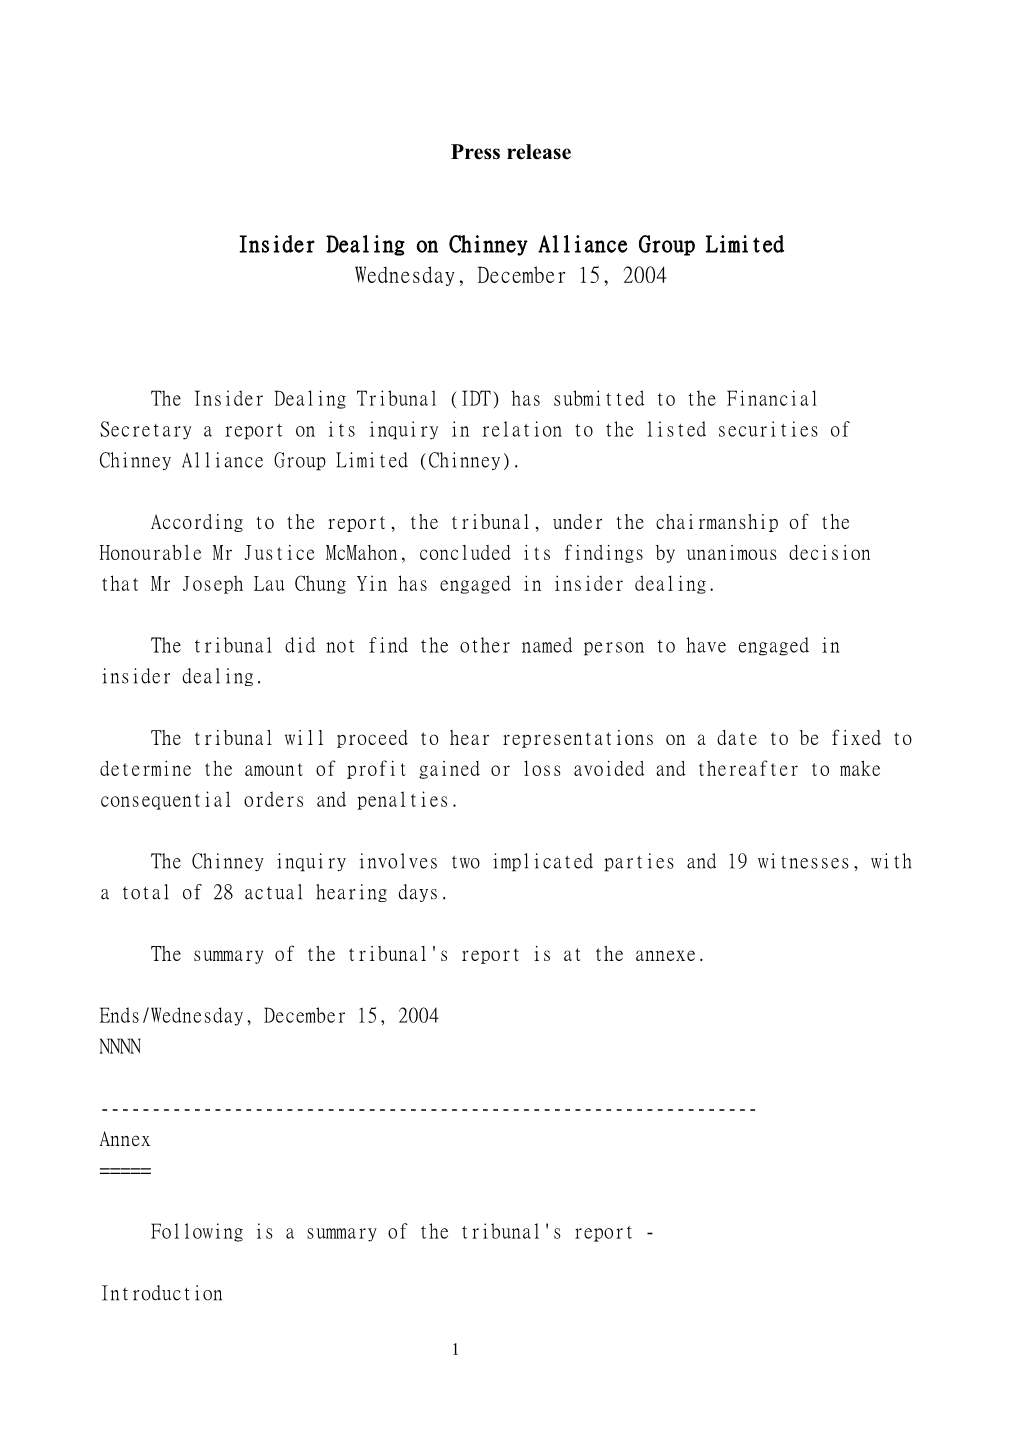 Insider Dealing on Chinney Alliance Group Limited (15